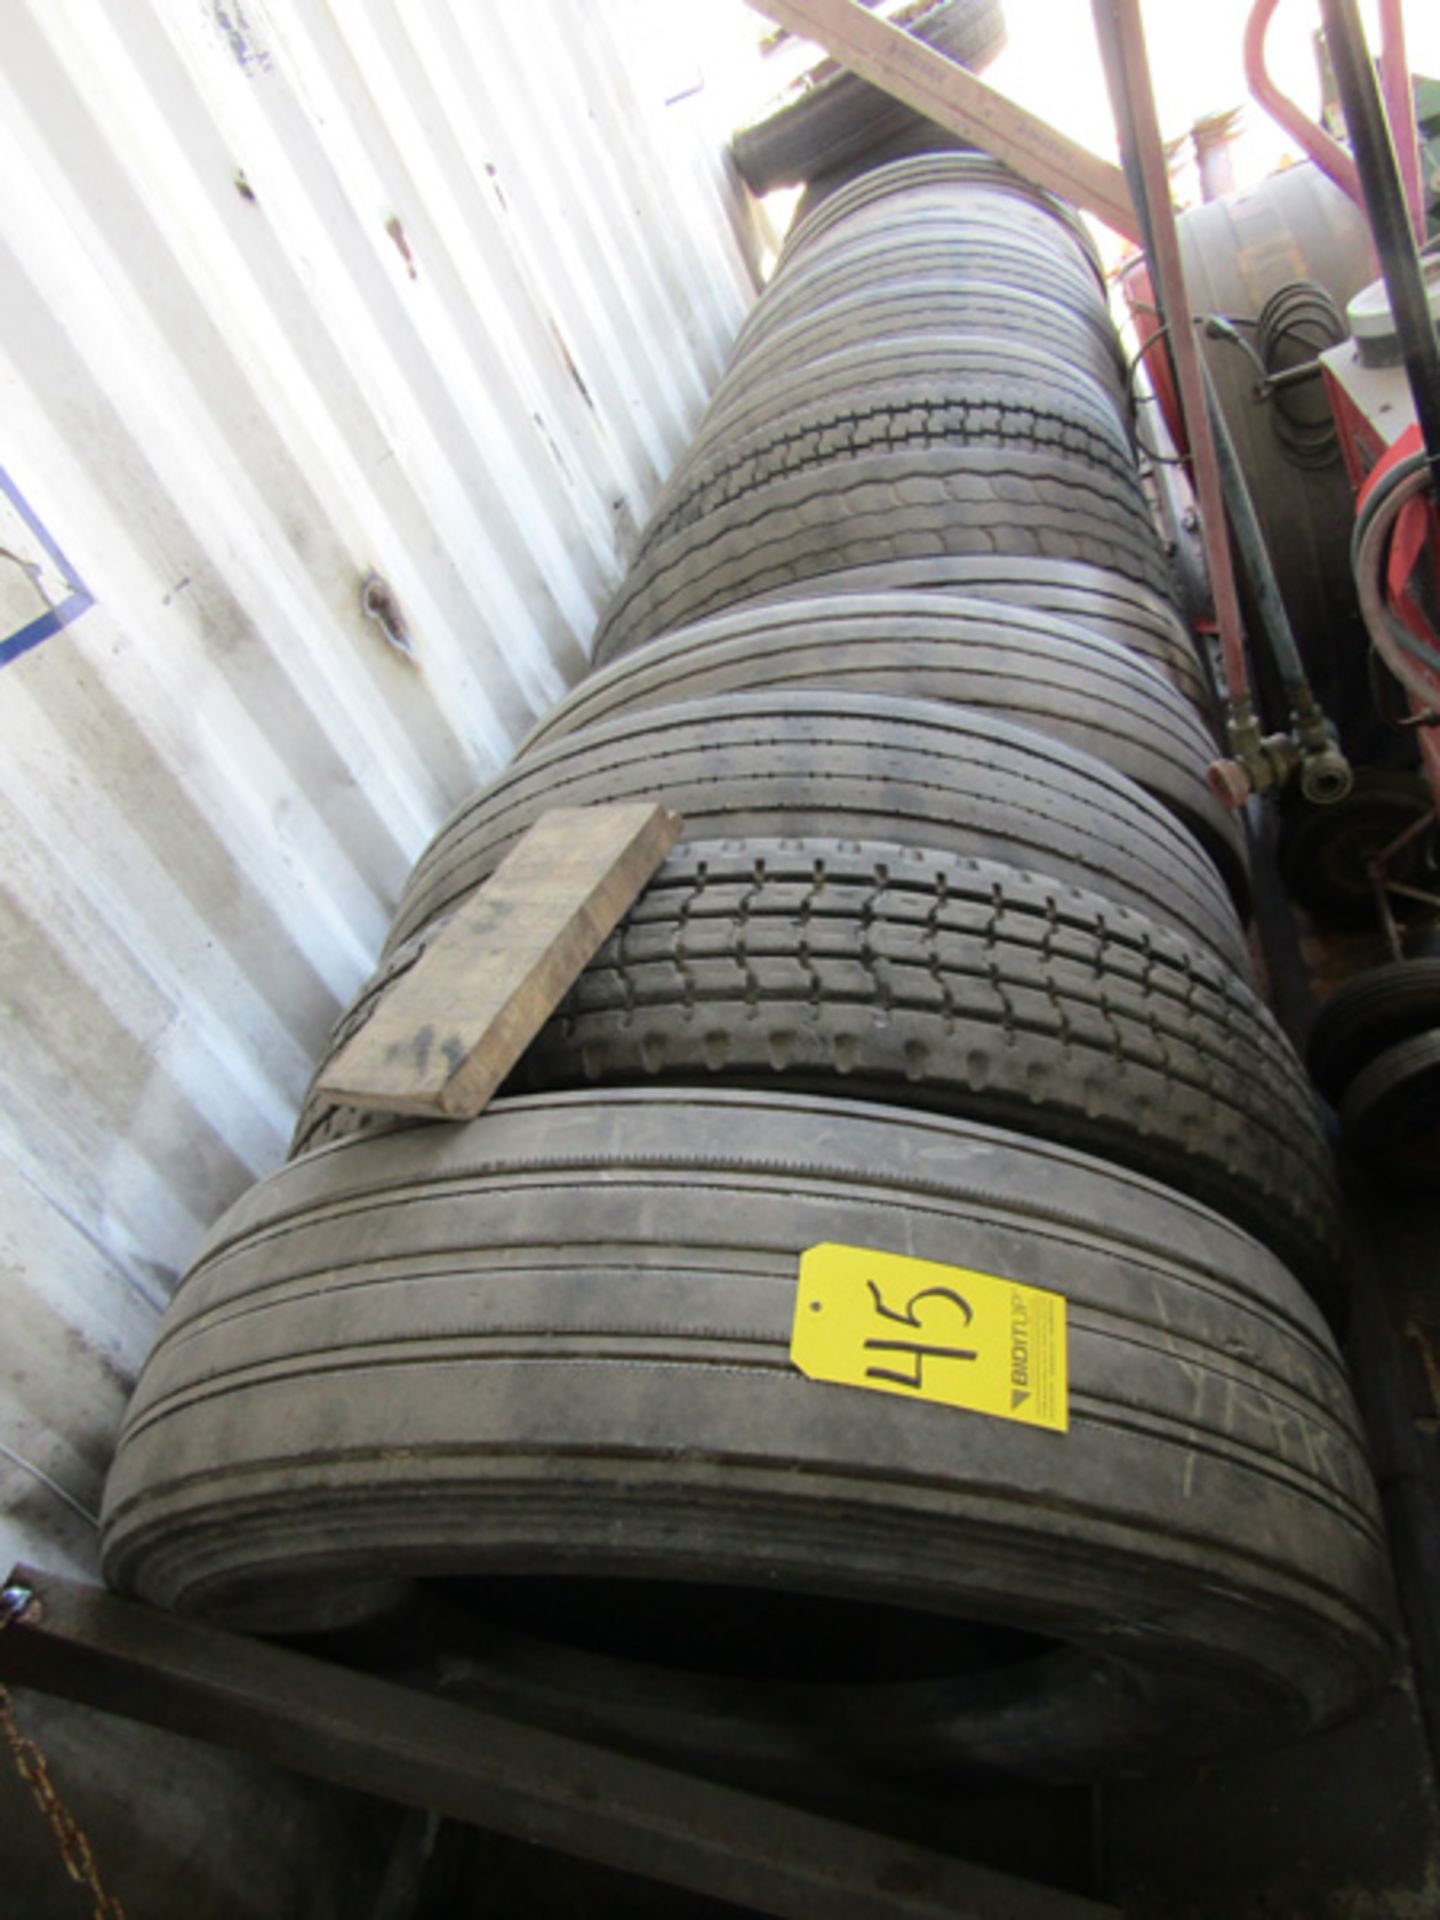 Lot 20 tires - Located In 7641 Woodley Road, Jacksonville, FL 32219